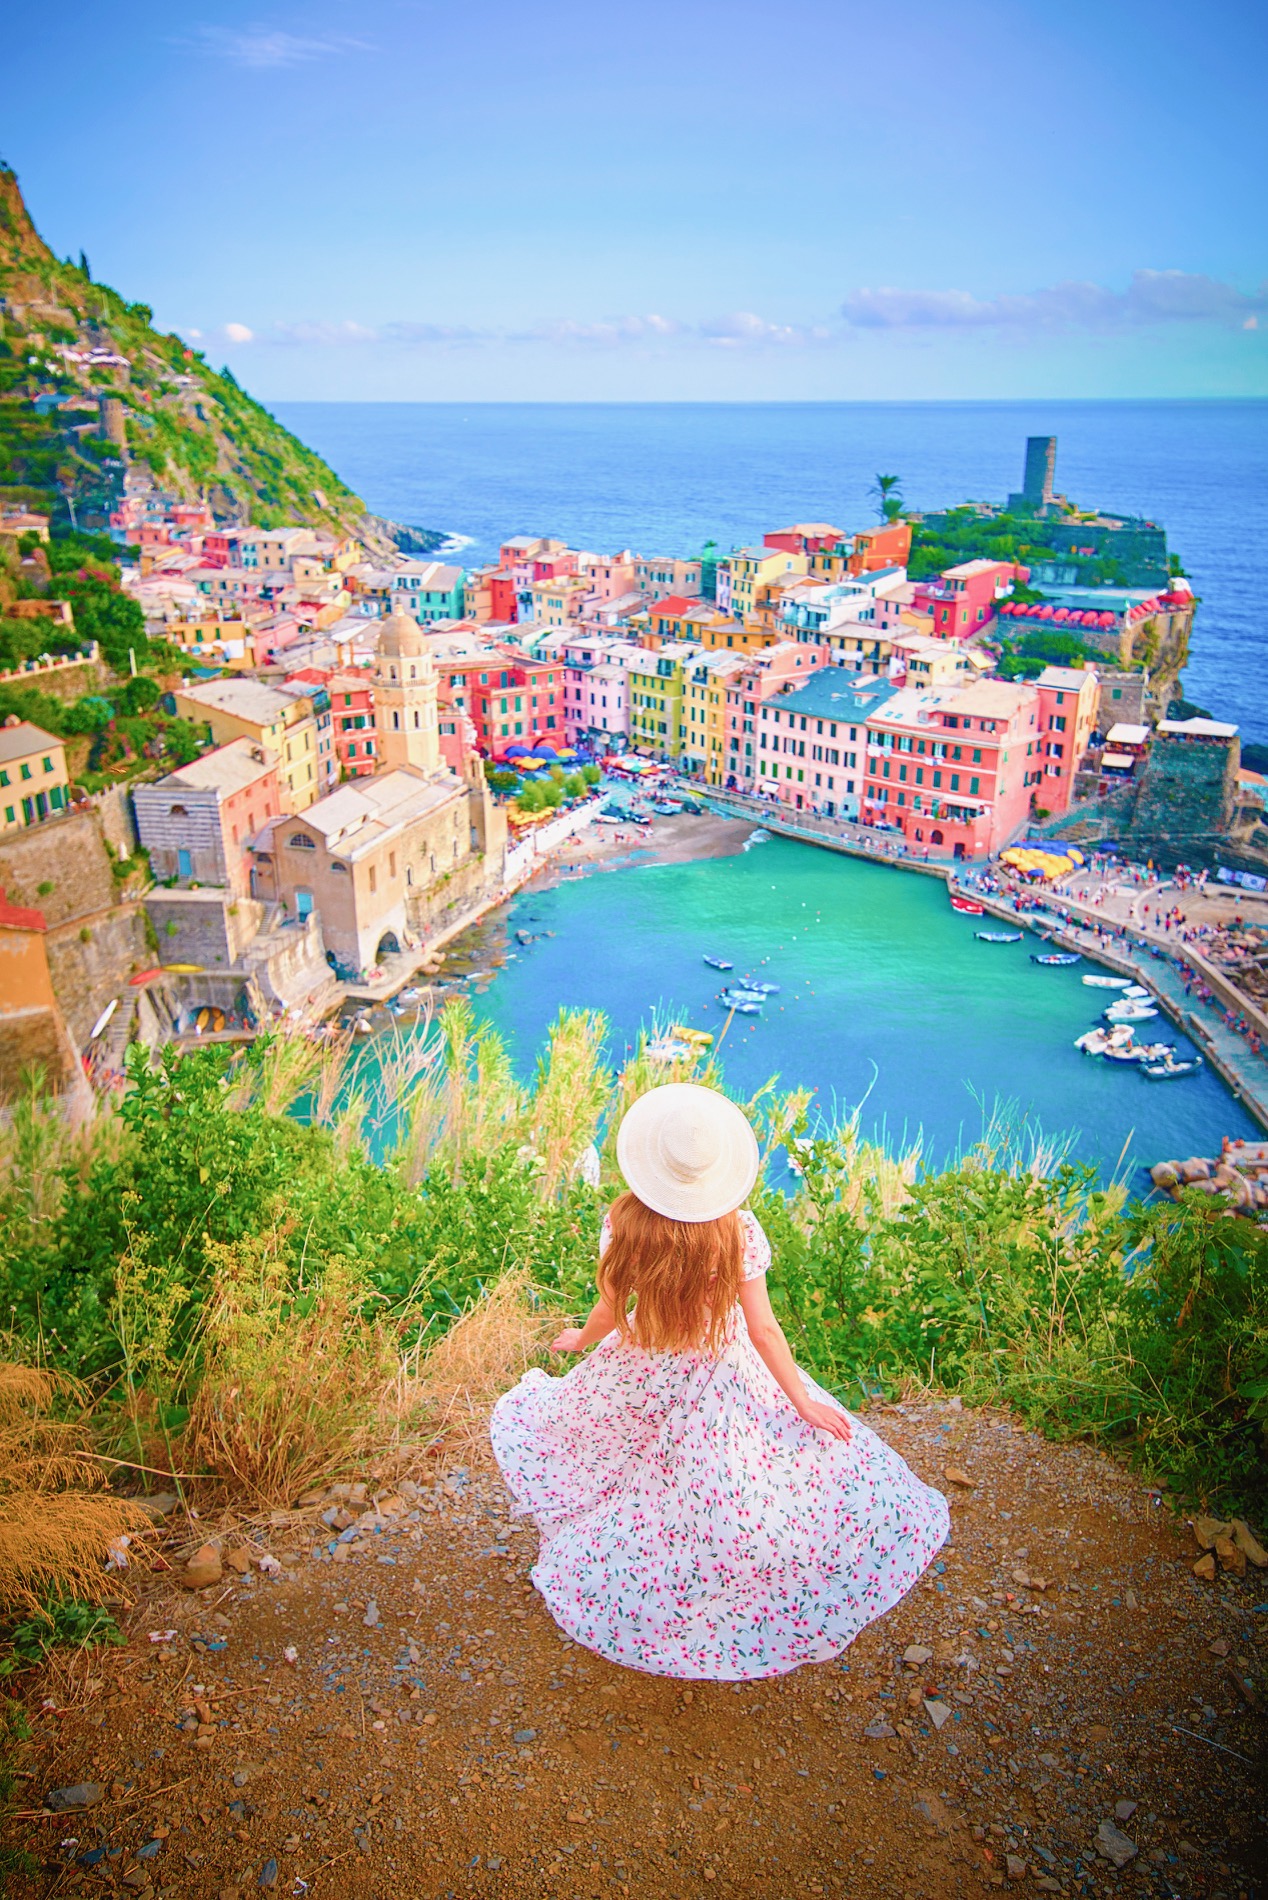 Woman in a floral dress overlooking a color town and harbor in Cinque Terre.